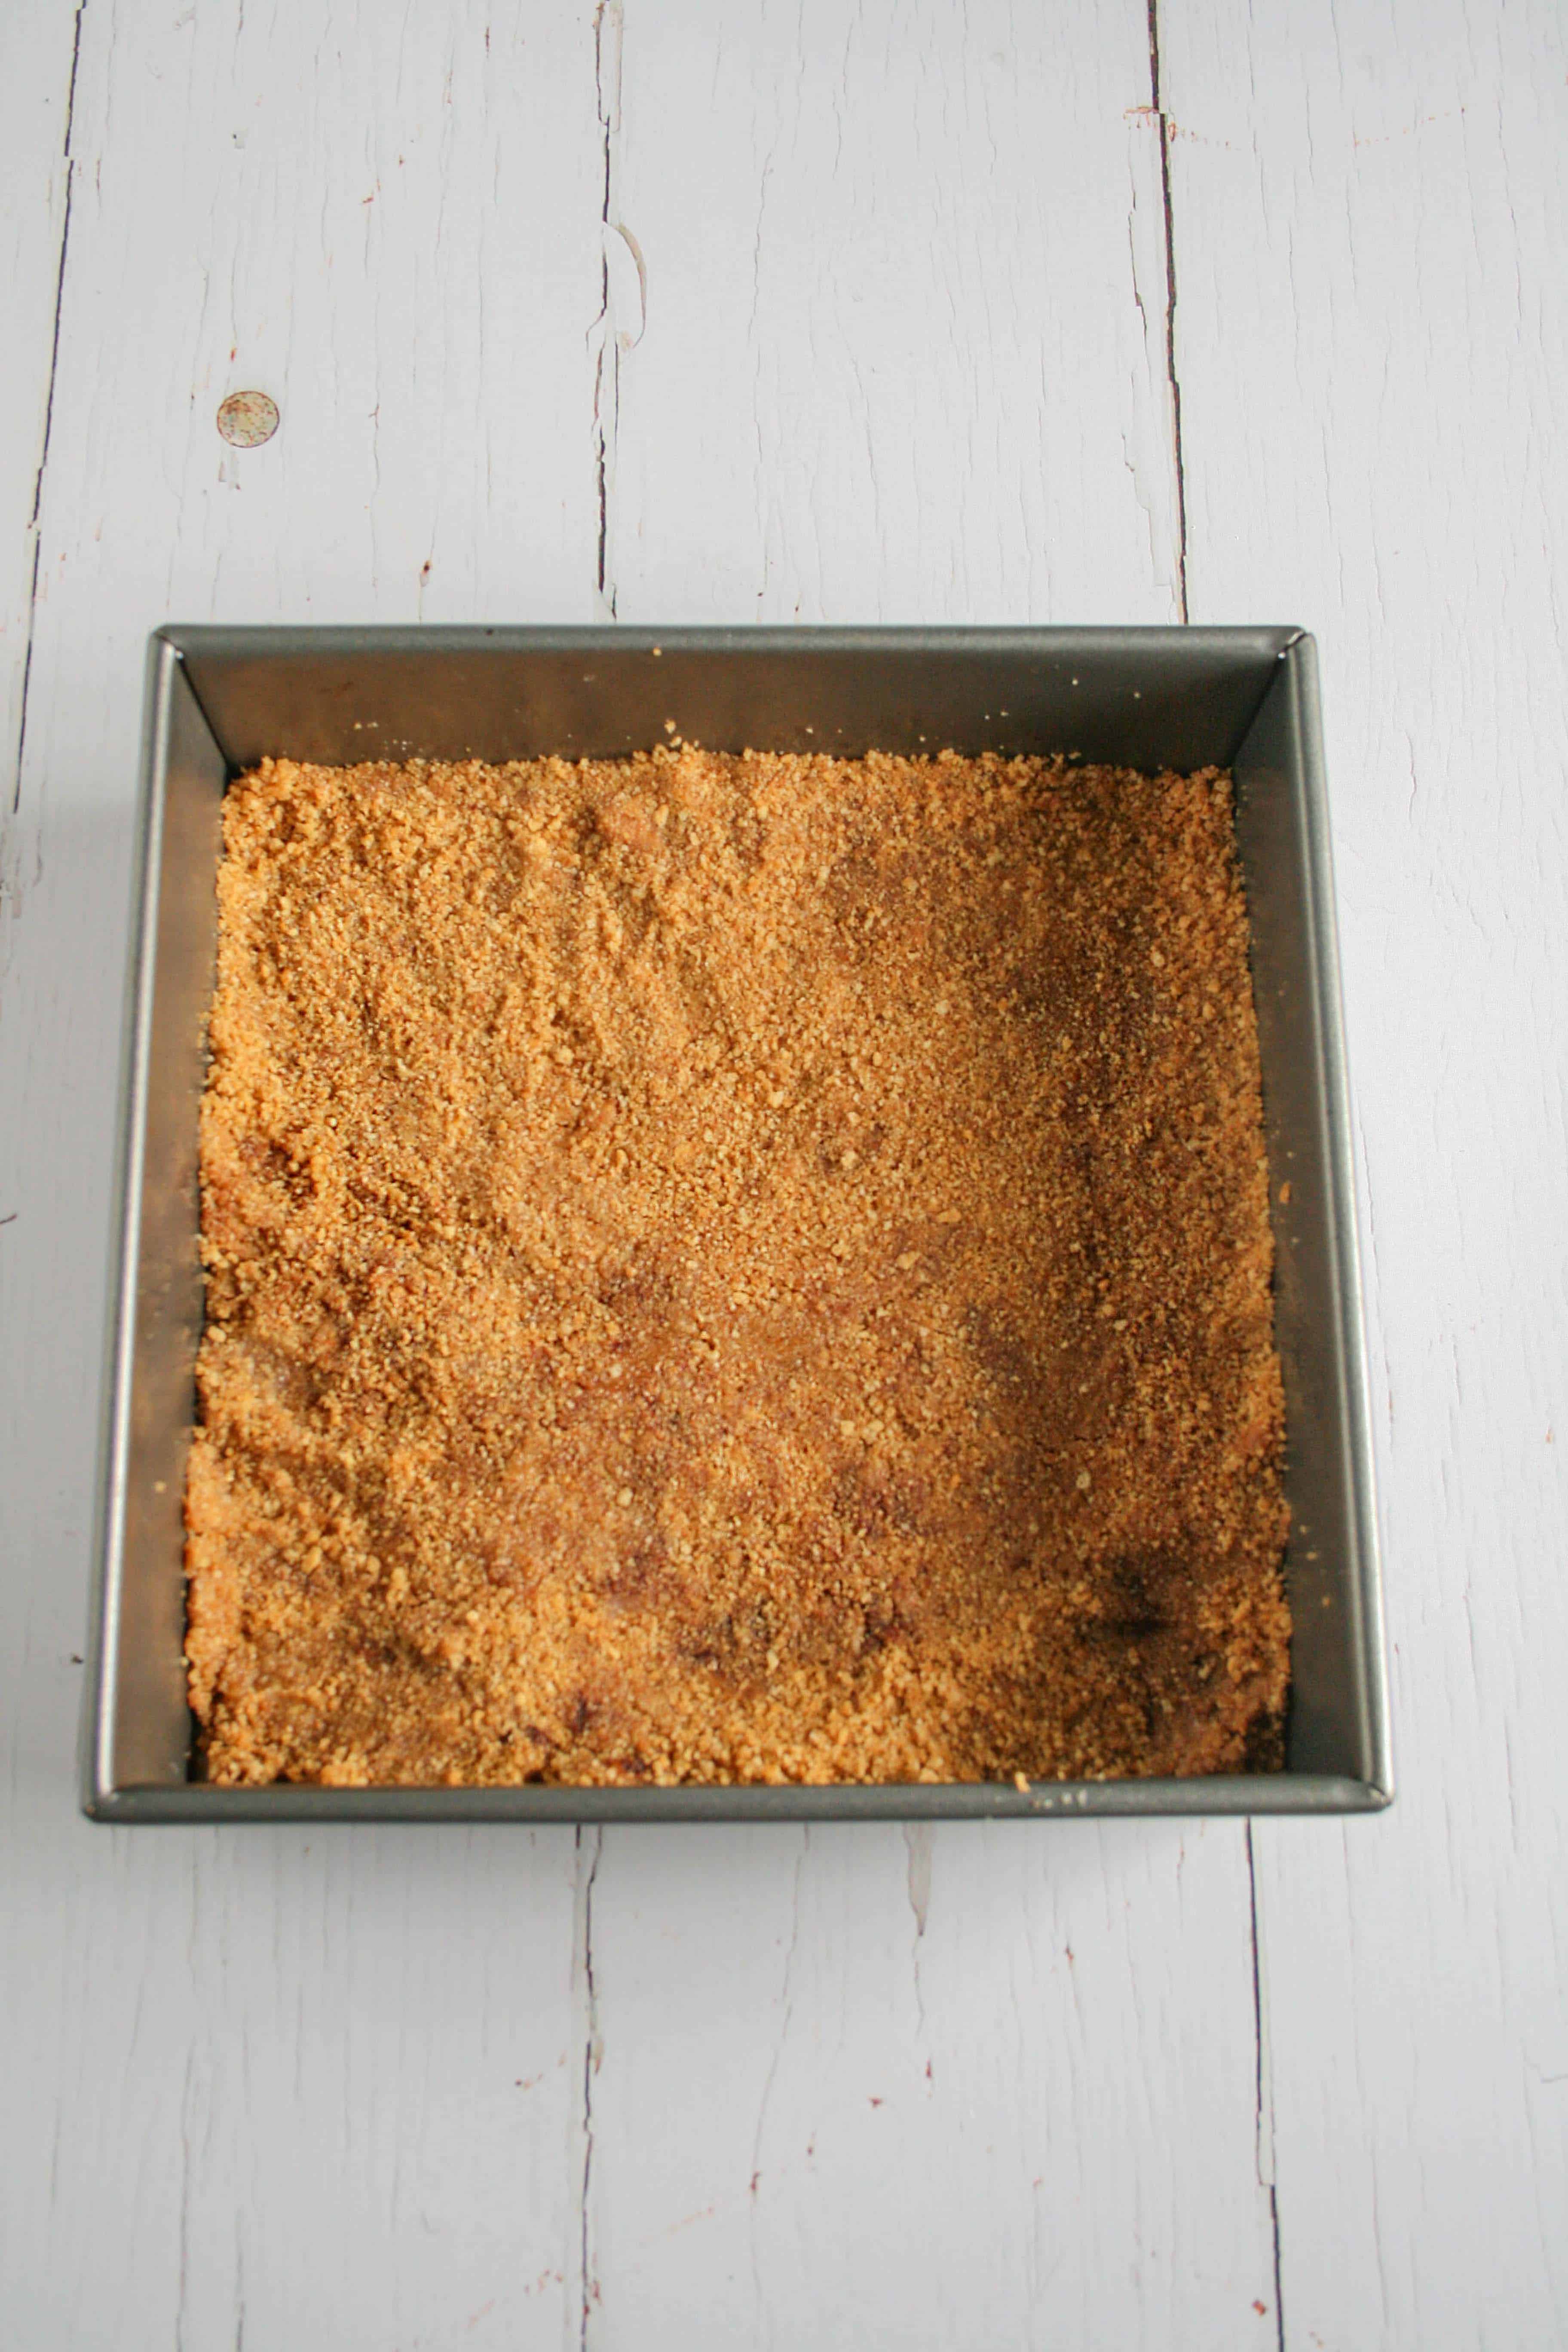 Graham cracker crust packed into a baking dish